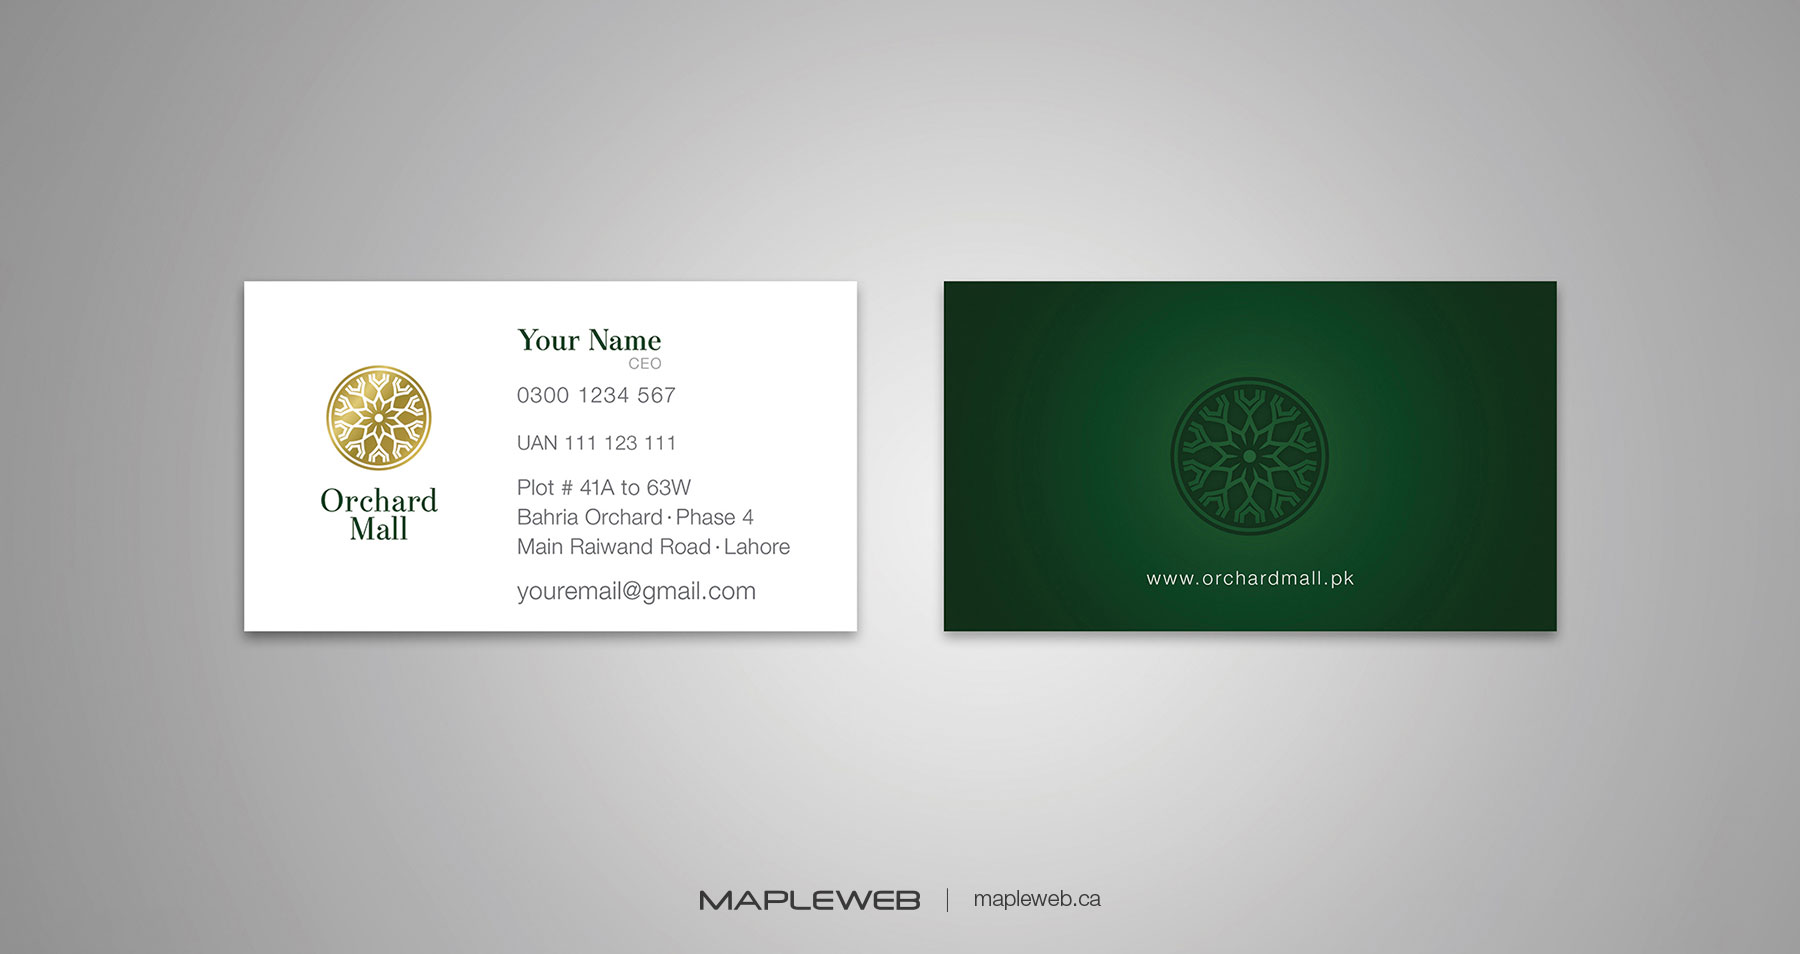 Orchard Mall Business Card Brand design by Mapleweb